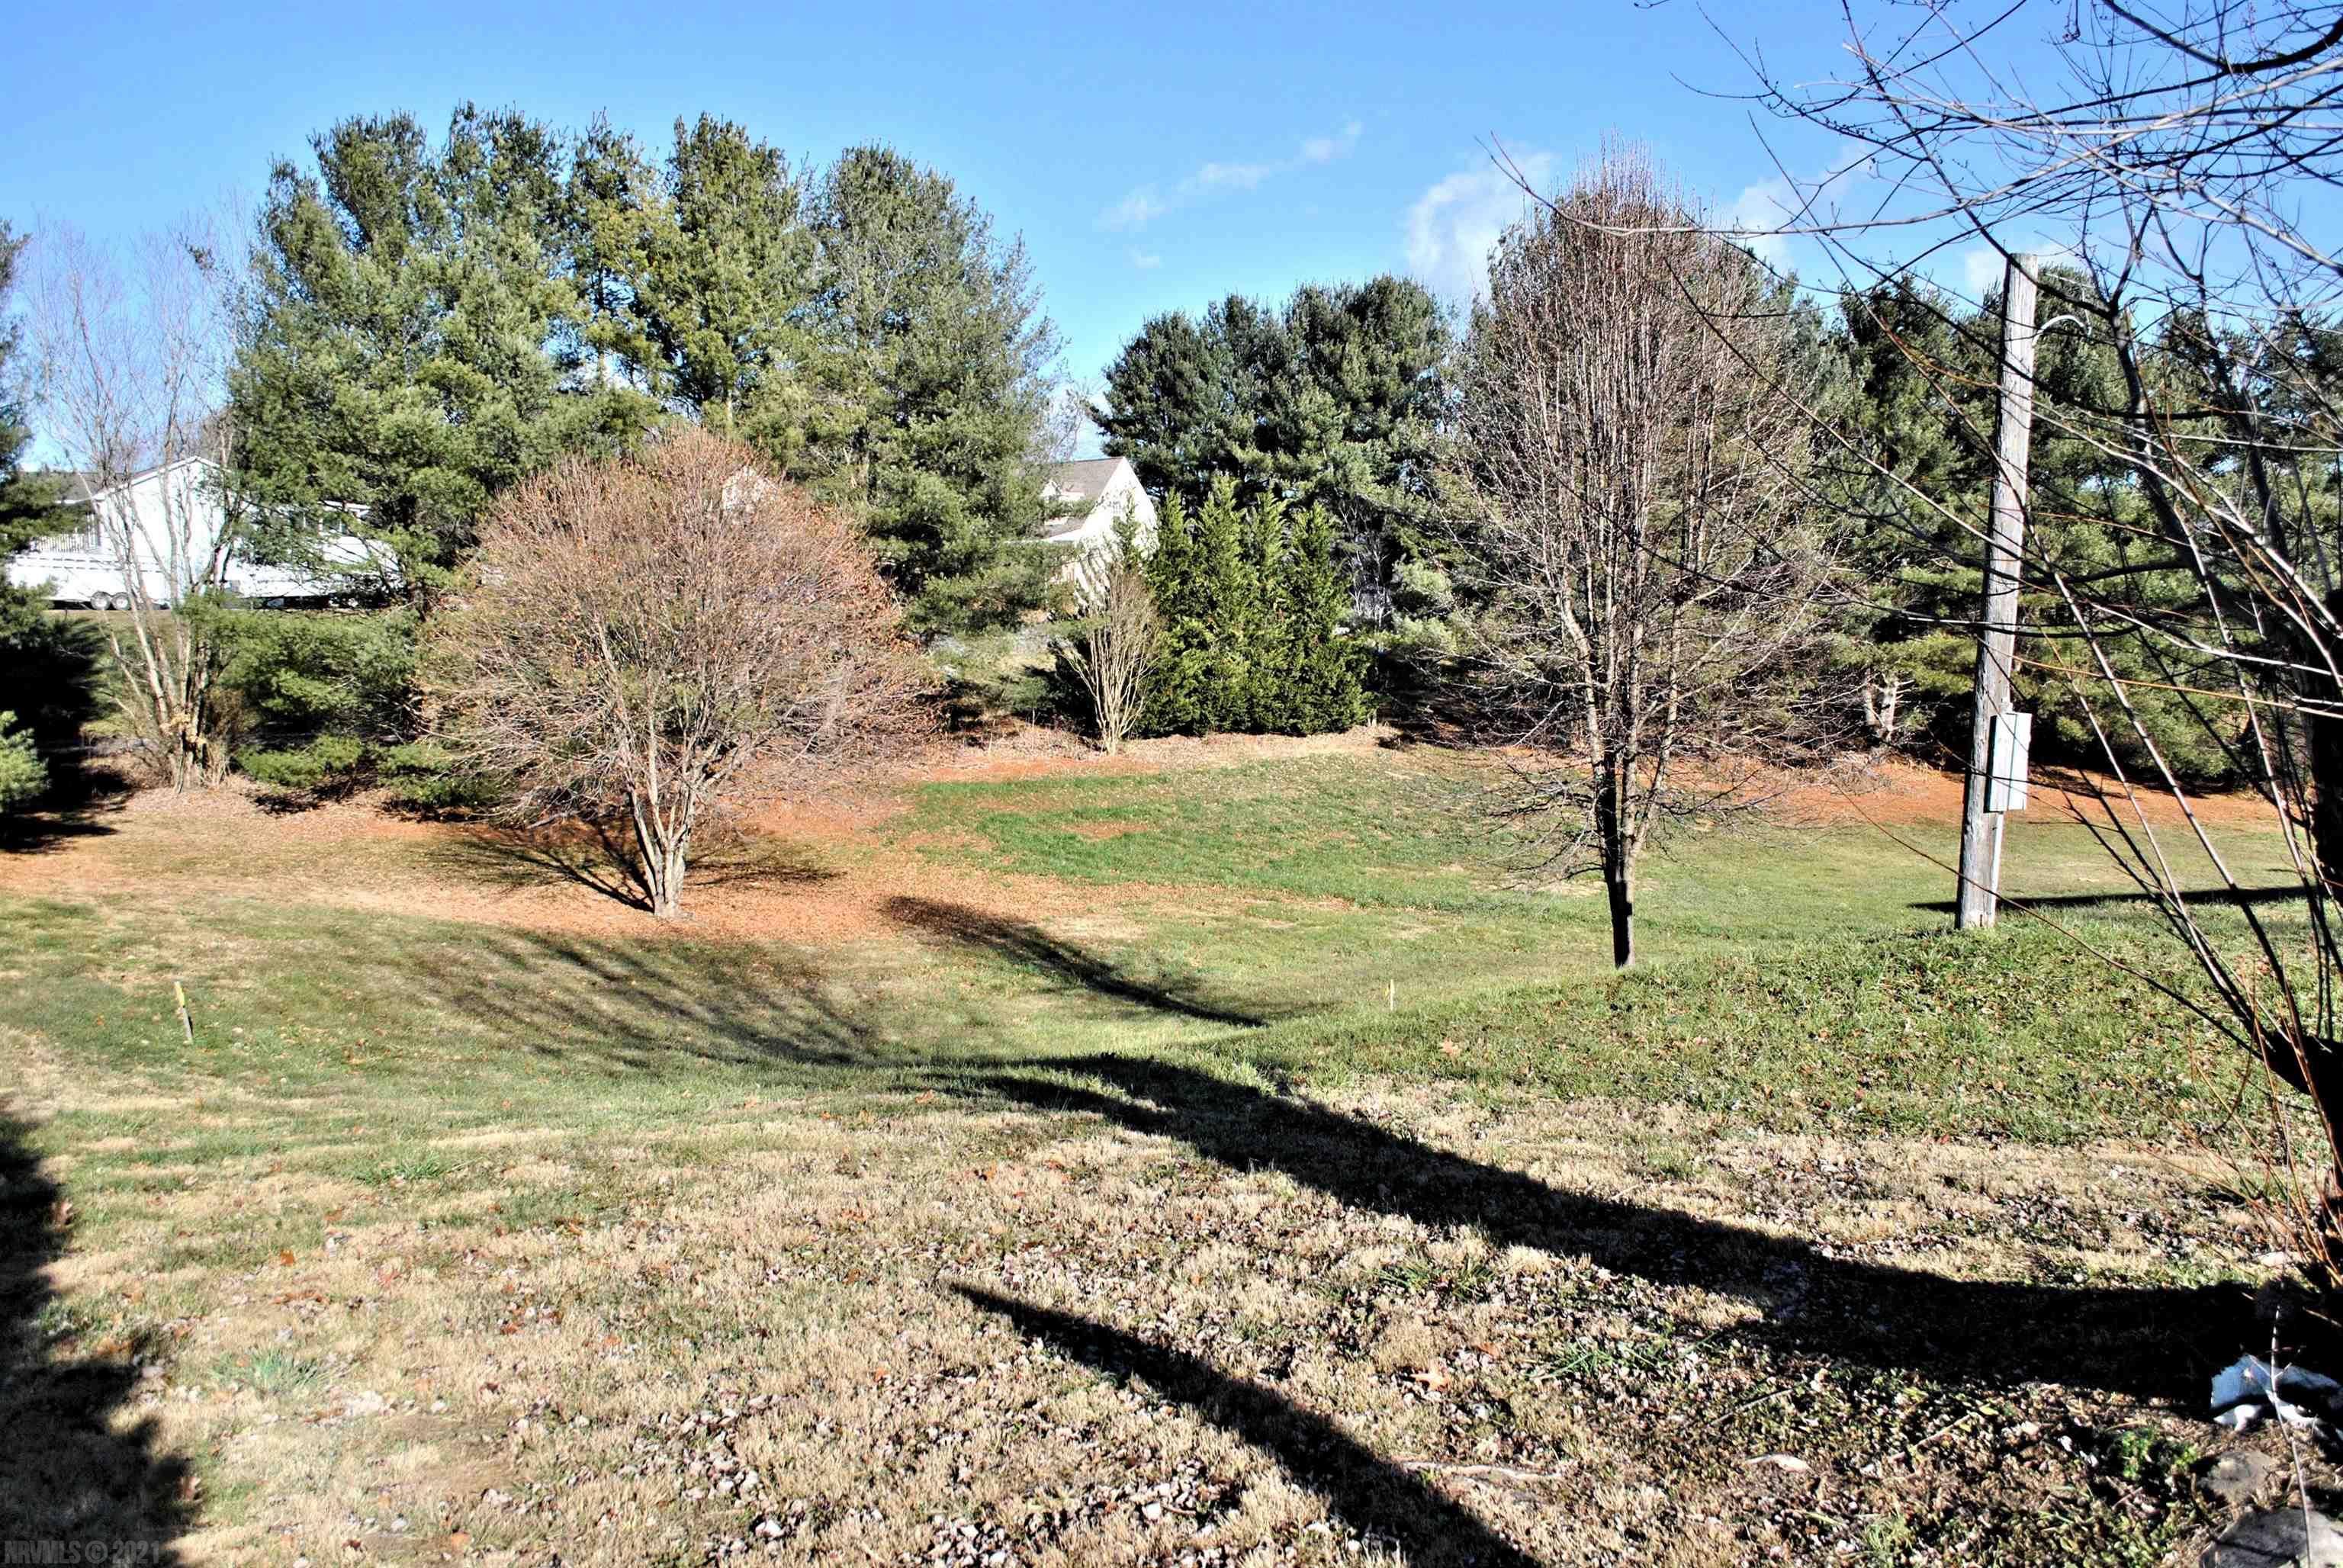 This 1/2 acre lot is ready for your new home with a new perk test for a 3 bedroom/4 person occupant septic system.  Public water is available too.  There are no deed restrictions on the property.  Call for more information or to schedule a private showing.